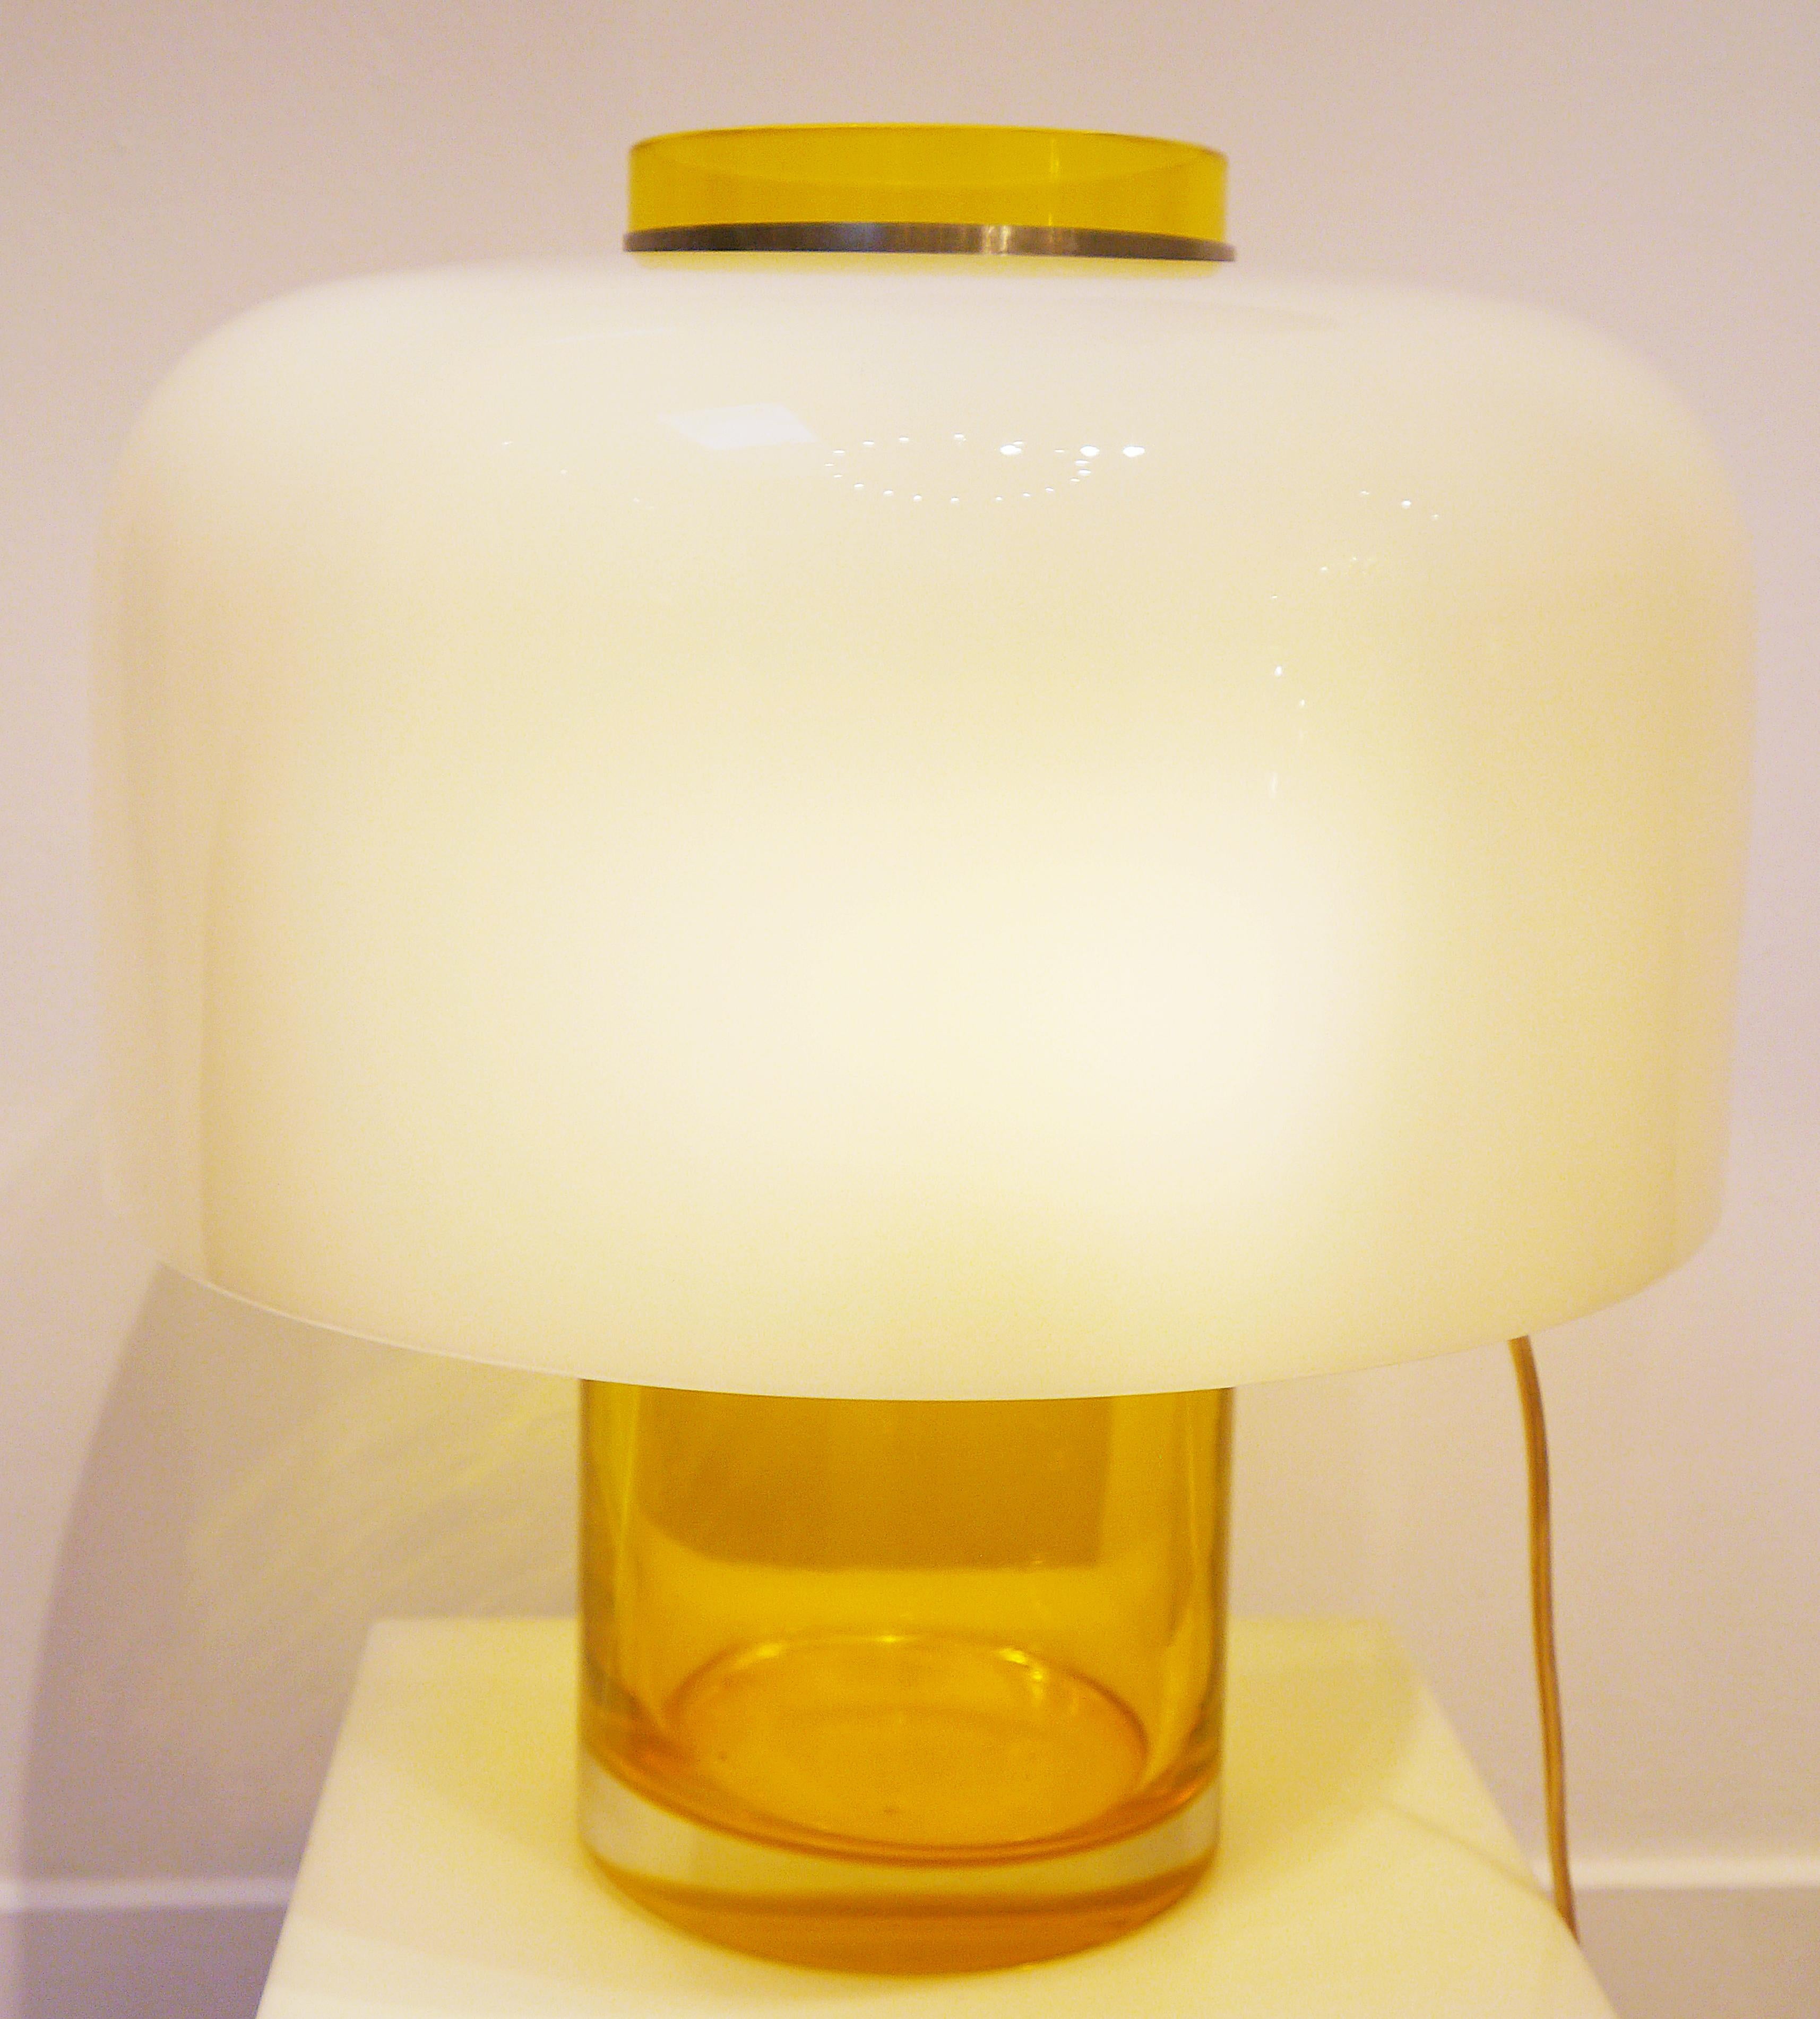 Table lamp and vase LT226 by Carlo Nason for Mazzega, Italy, 1965-1969.